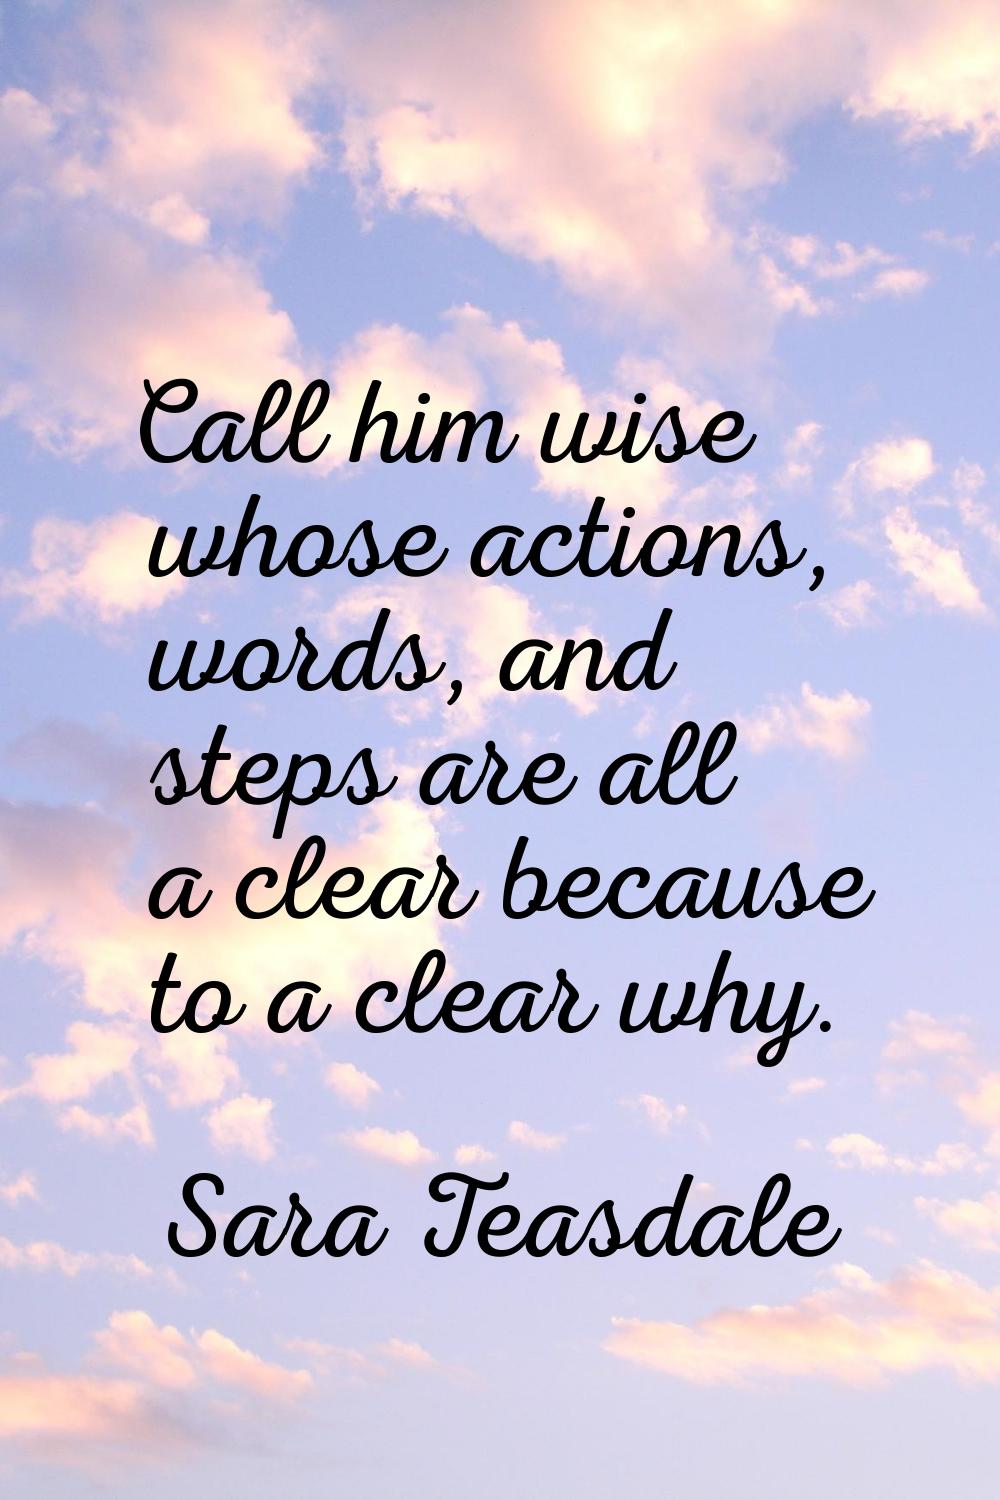 Call him wise whose actions, words, and steps are all a clear because to a clear why.